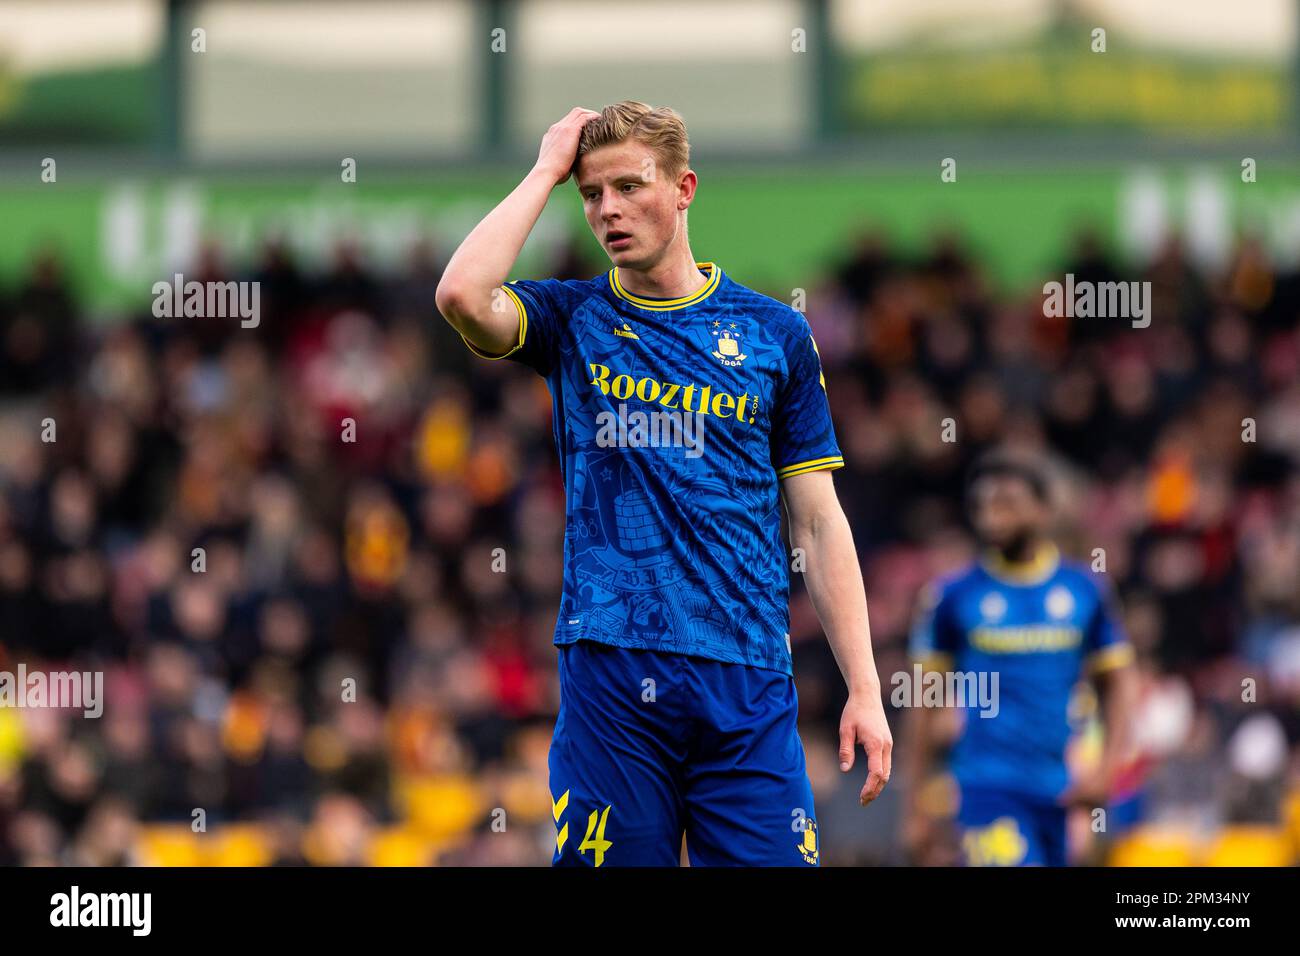 Farum, Denmark. 10th Apr, 2023. Frederik Winther (4) of Broendby IF seen during the 3F Superliga match between FC Nordsjaelland and Broendby IF at Right to Dream Park in Farum. (Photo Credit: Gonzales Photo/Alamy Live News Stock Photo